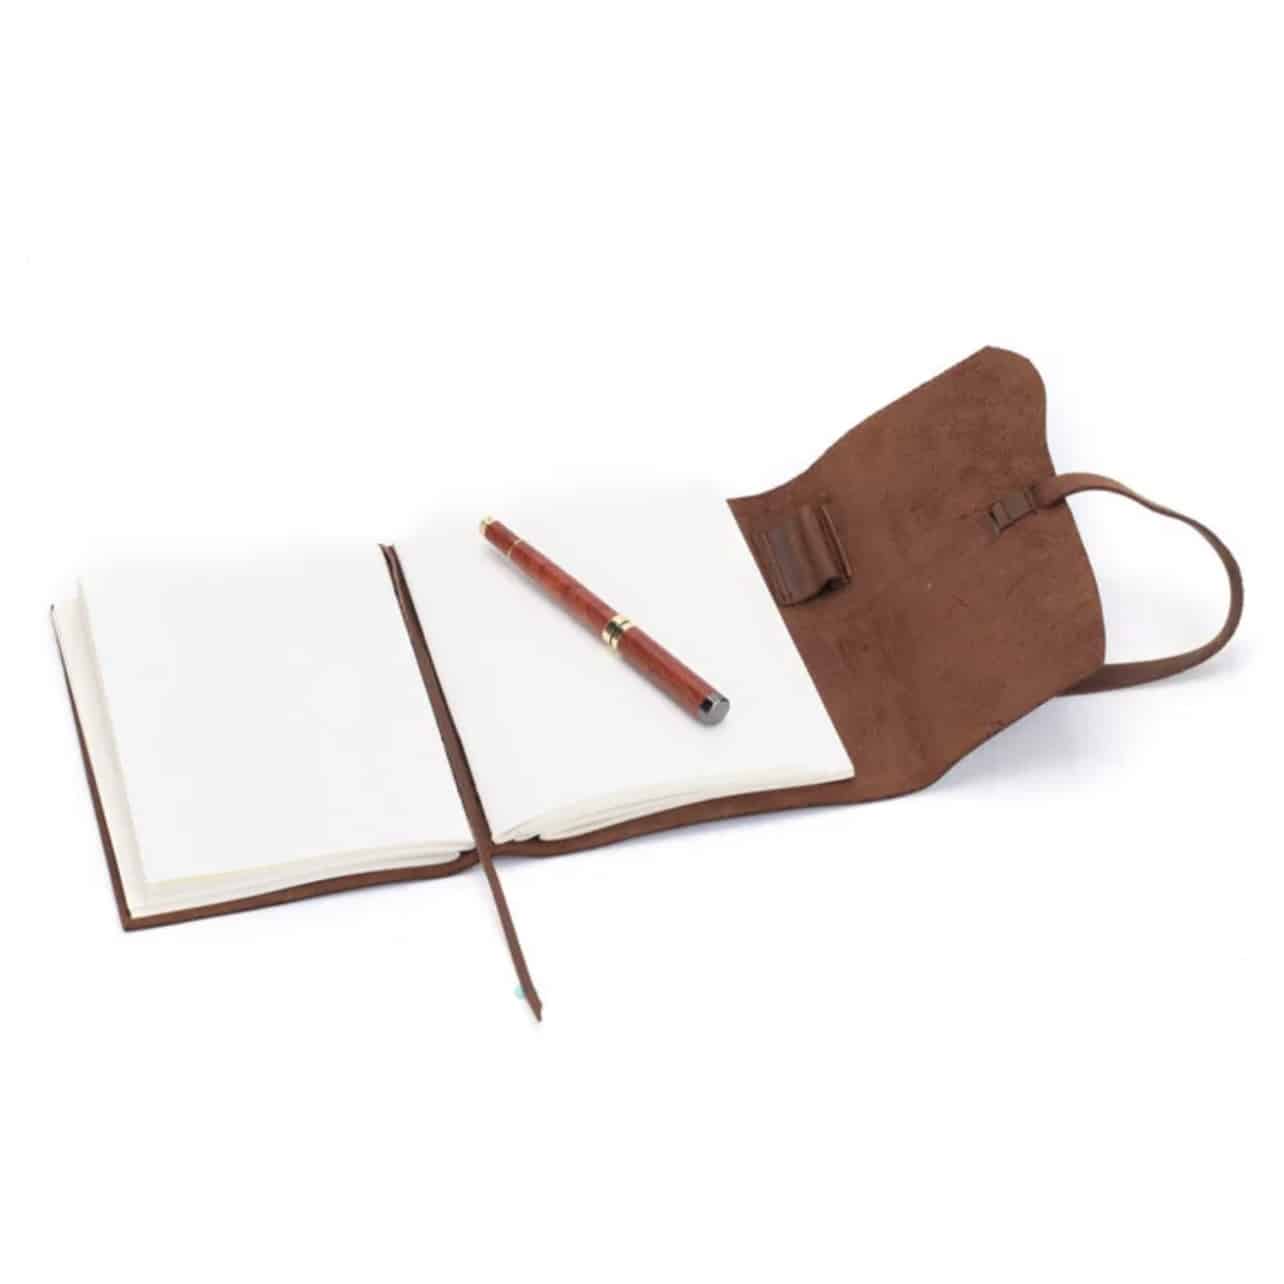 Spellbound Leather Writing Journal Sinful Goods 